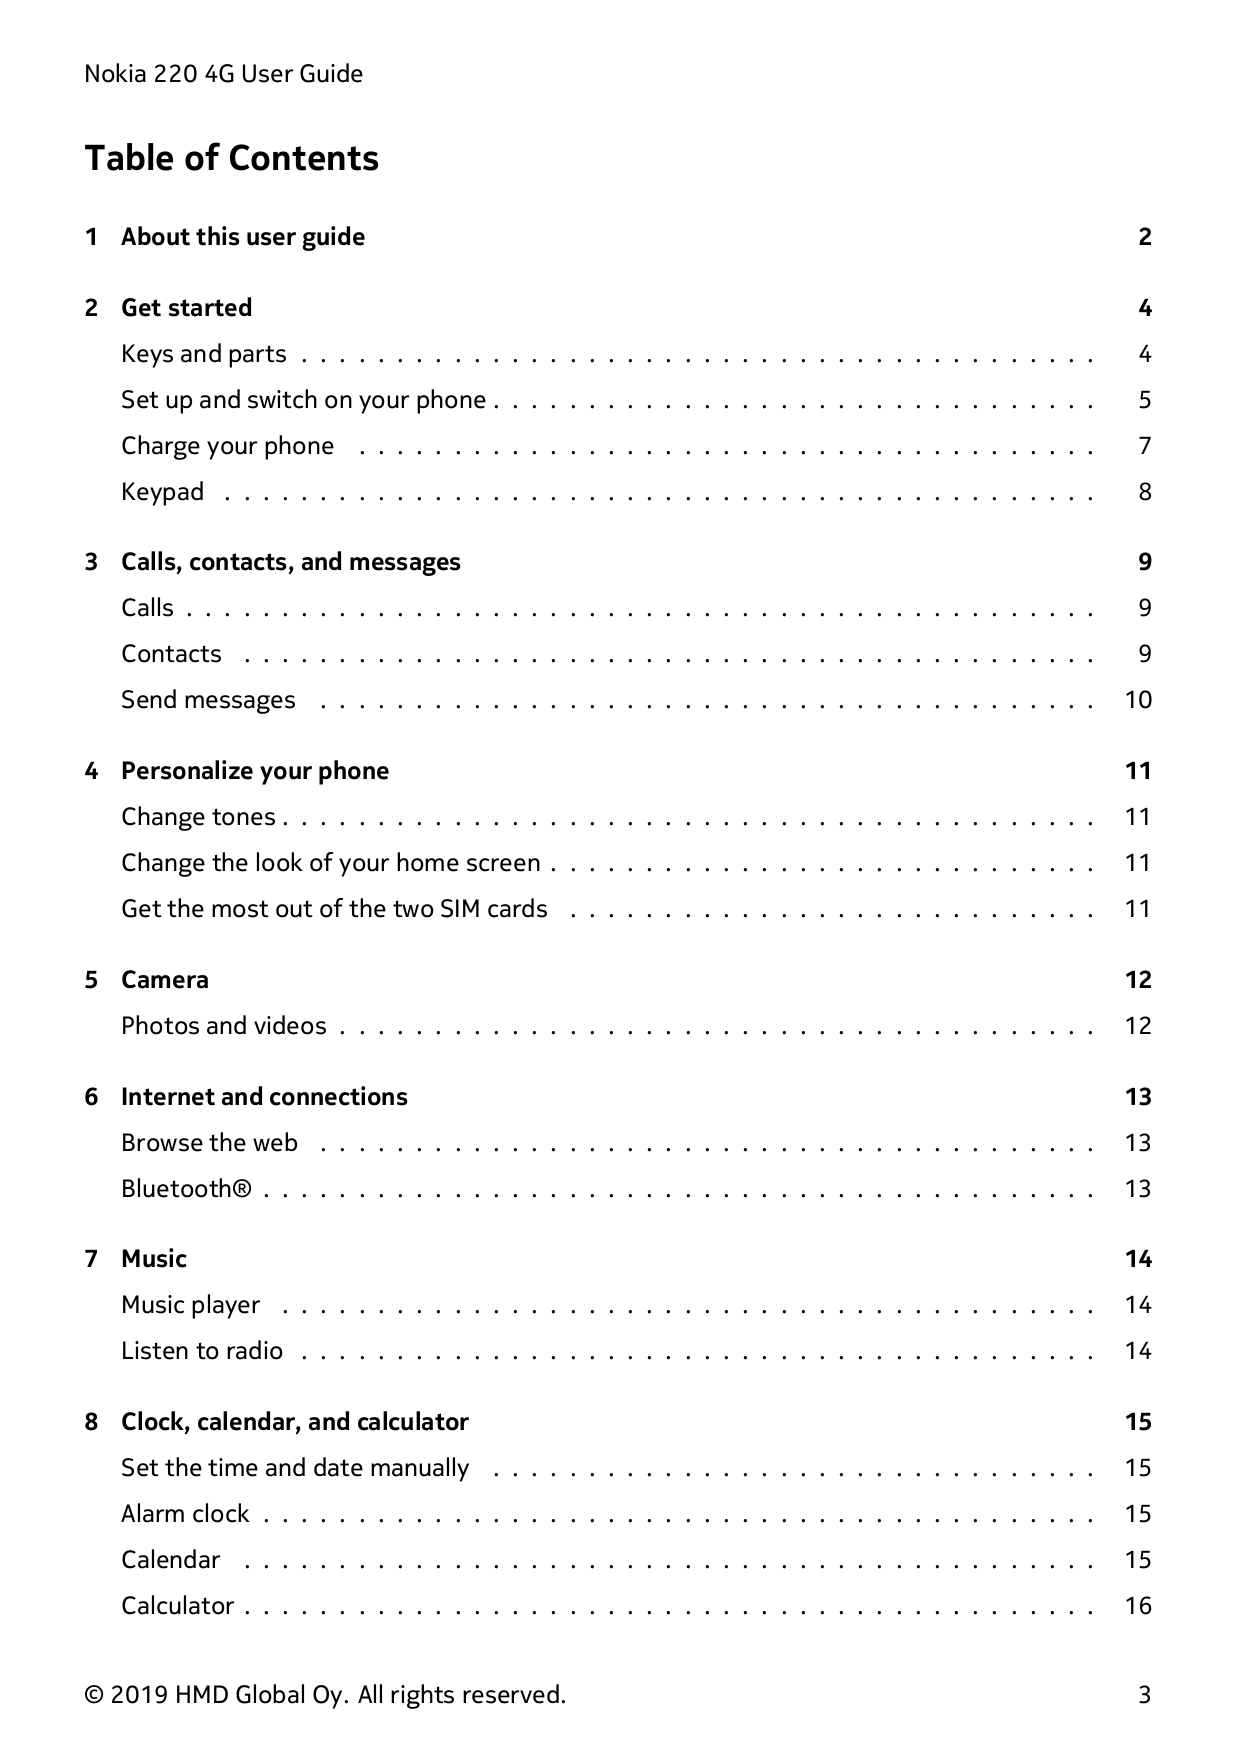 Nokia 220 4G User GuideTable of Contents1 About this user guide22 Get started4Keys and parts . . . . . . . . . . . . . . . . . .